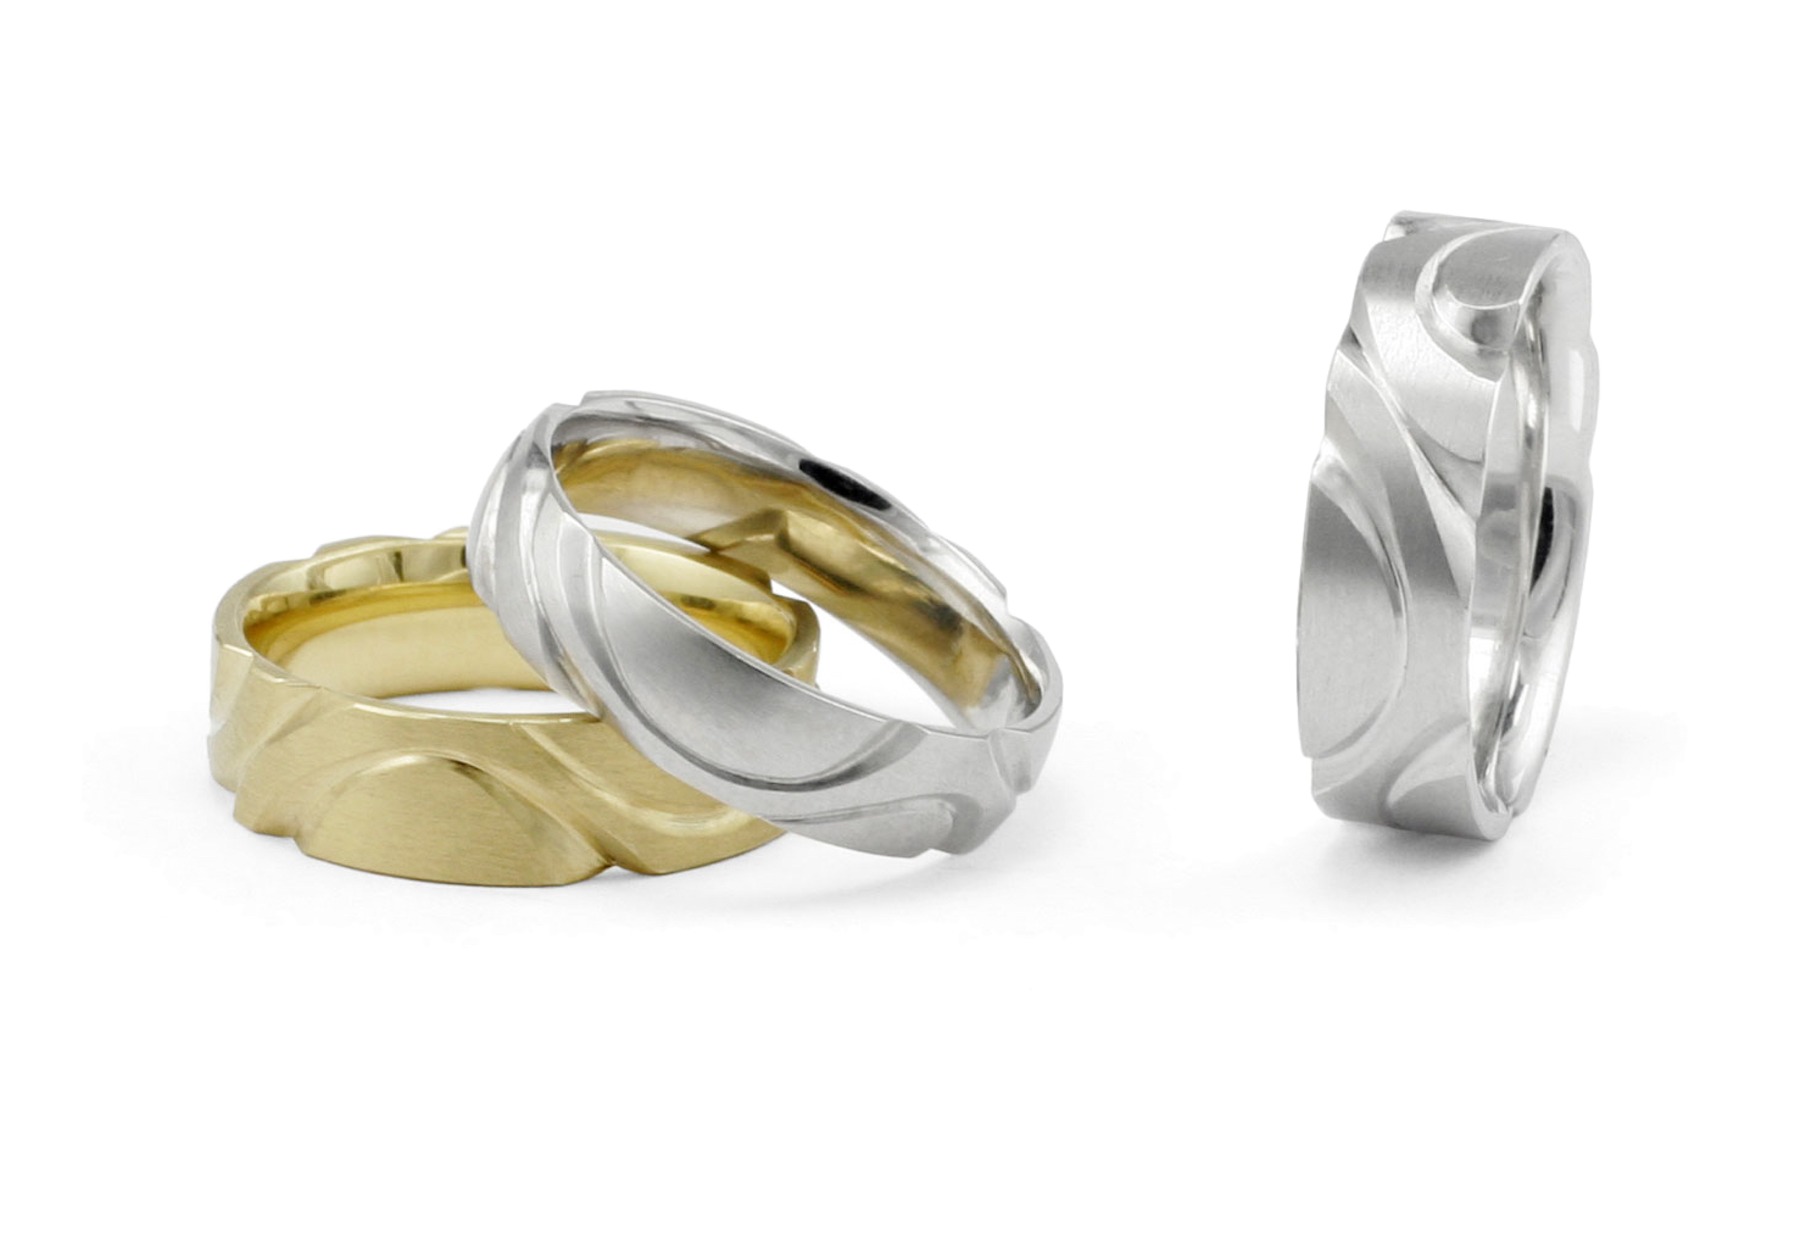 Hand carved platinum and yellow gold men's wedding rings